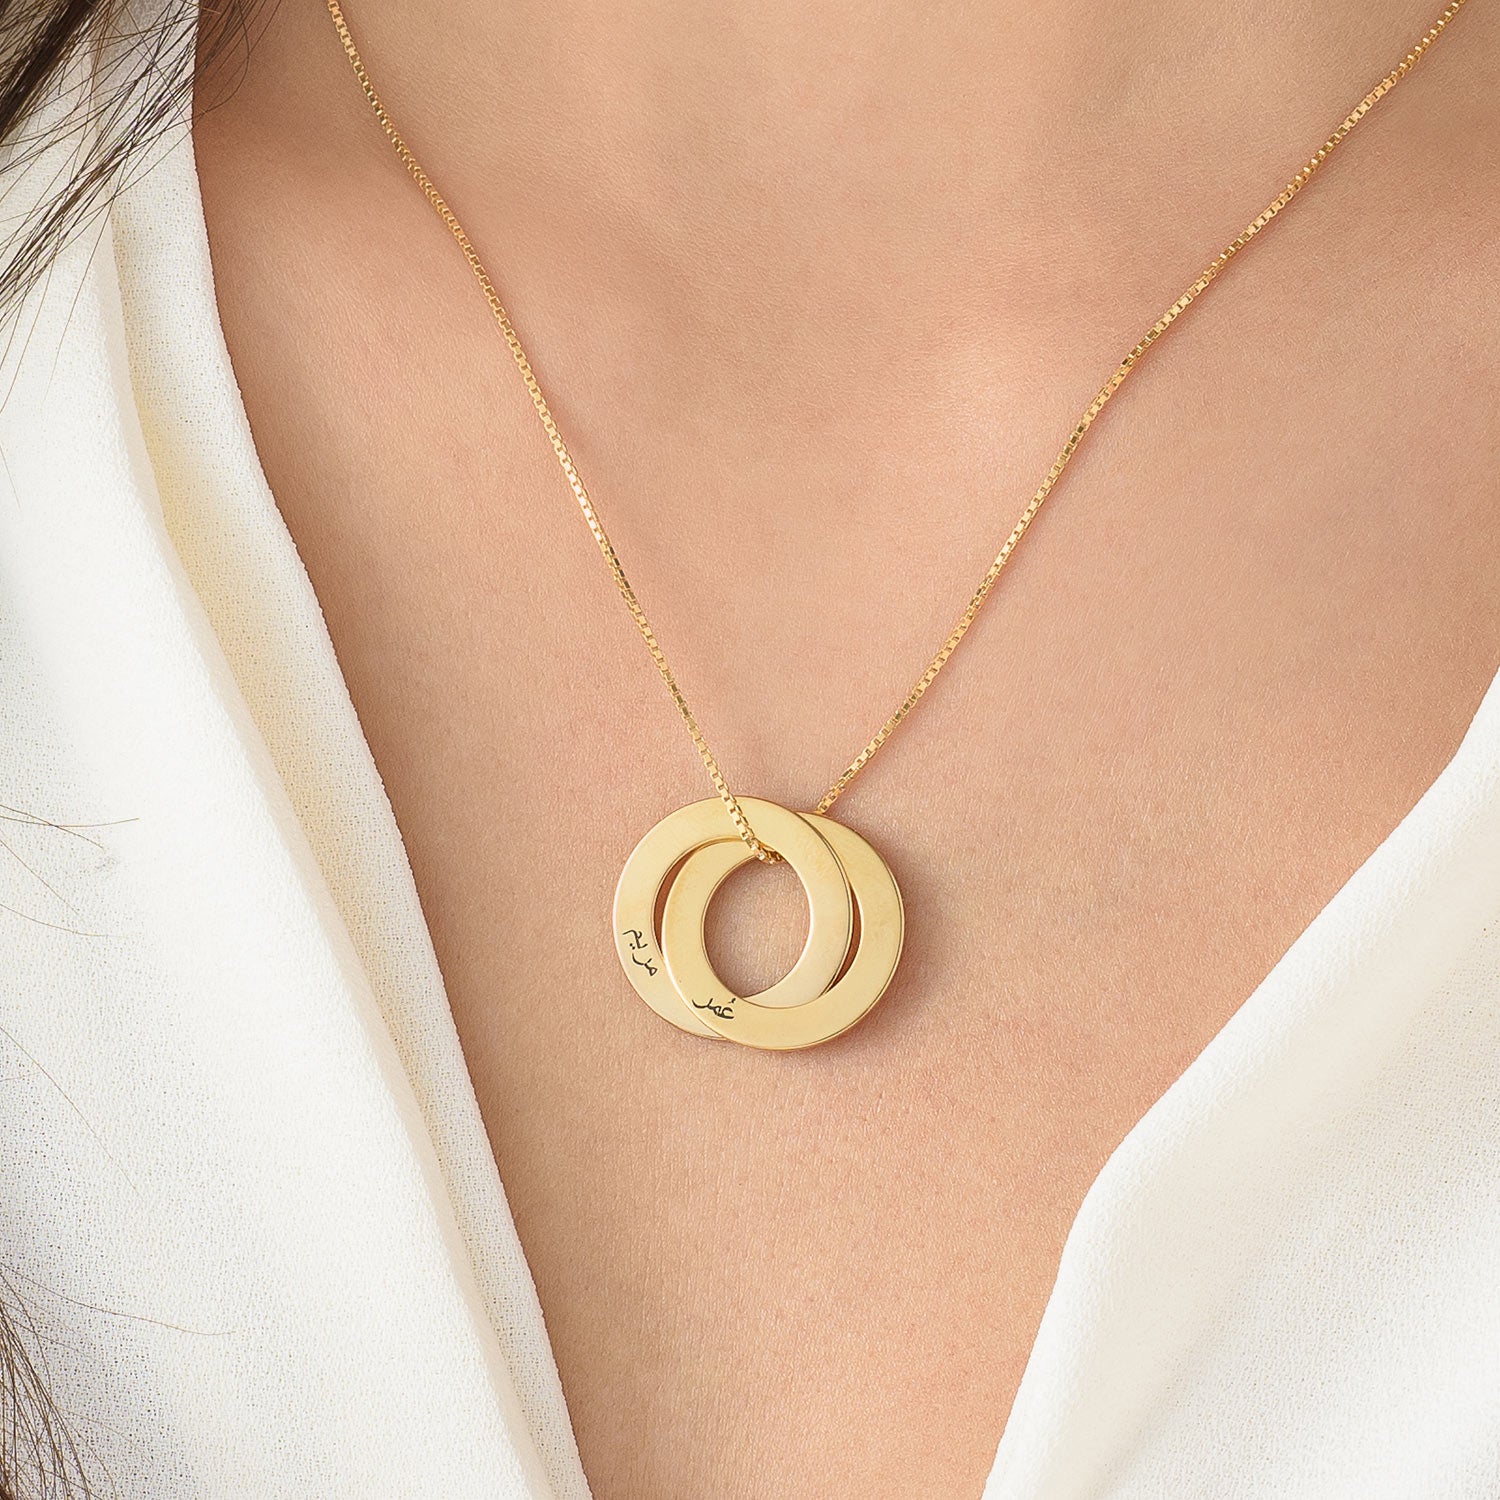 Jewlr - Touch Mom's heart with this Russian Ring Necklace 💗 Personalize  1-3 rings by engraving the names of loved ones. https://jwl.io/213b7 |  Facebook